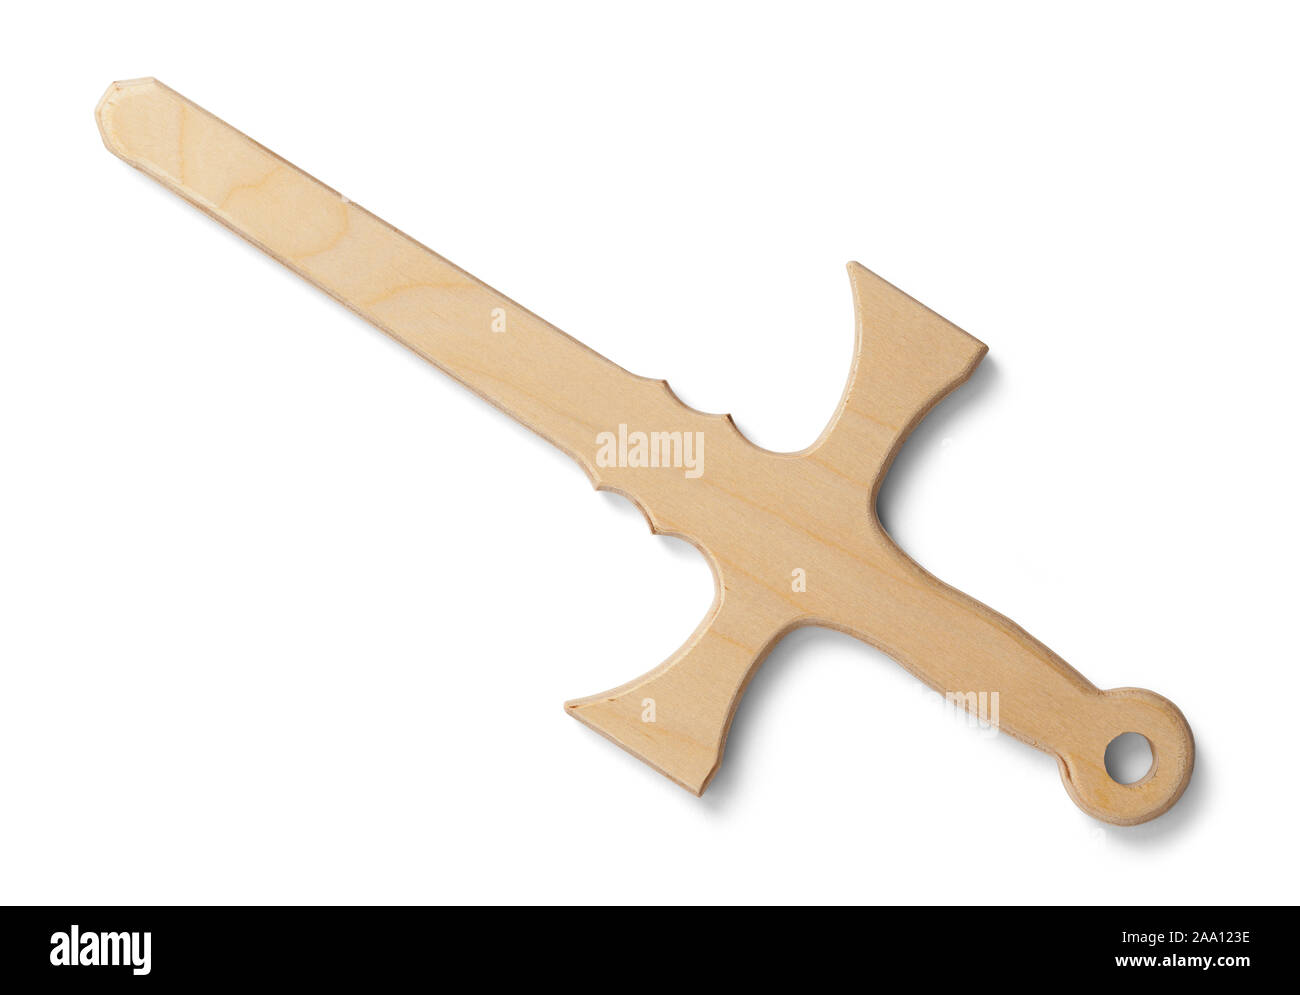 Wooden Toy Sword Isoated on White Background. Stock Photo